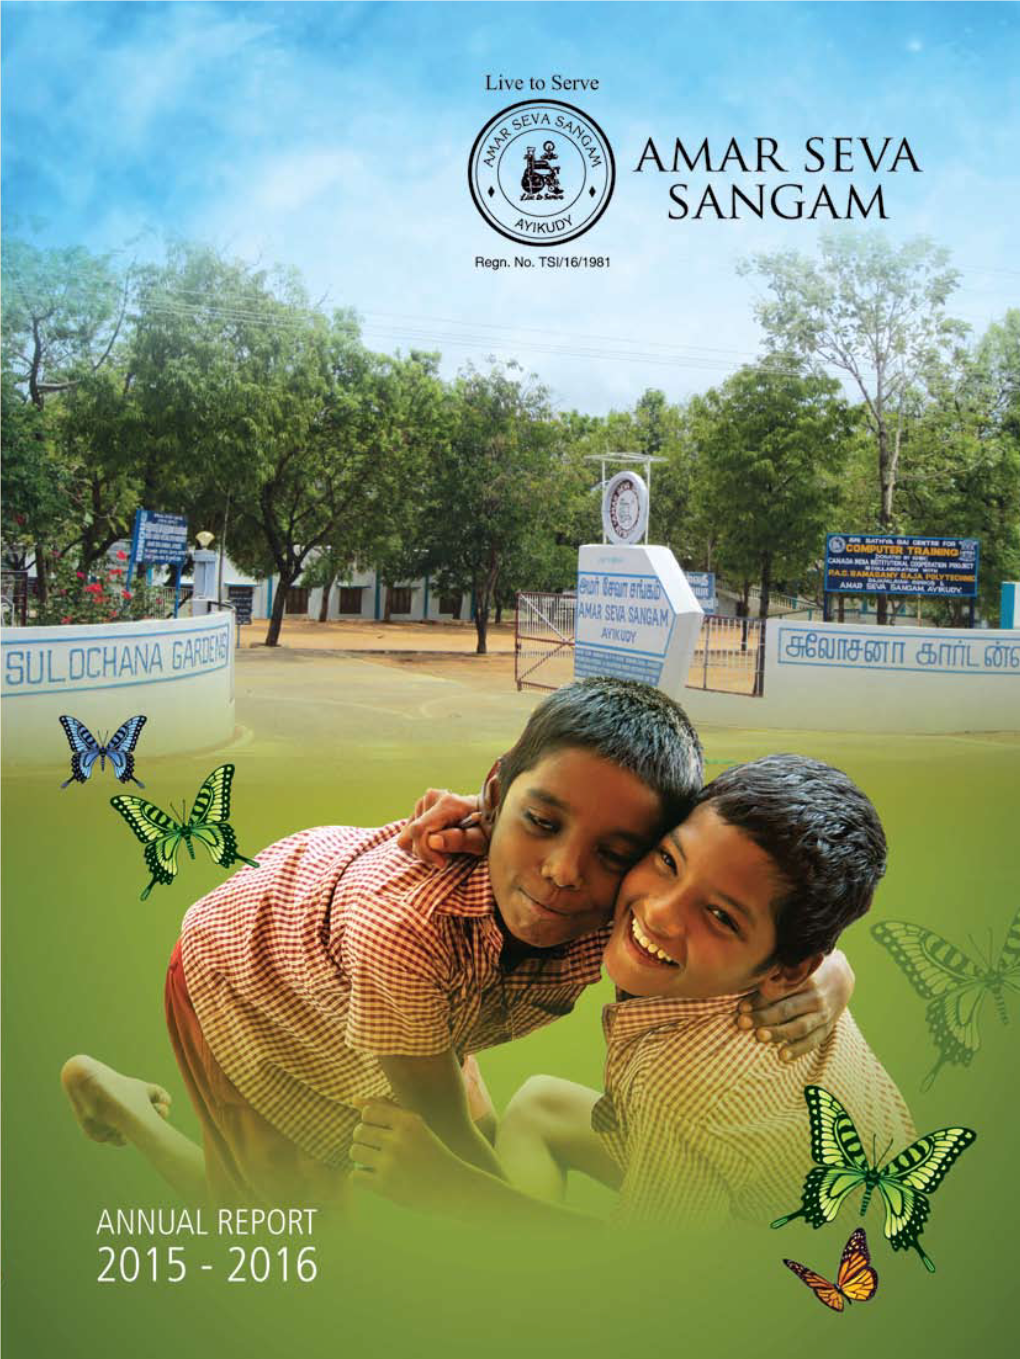 Annual Report of the Year 2015-16 Will Be Brought out by Amar Seva Sangam